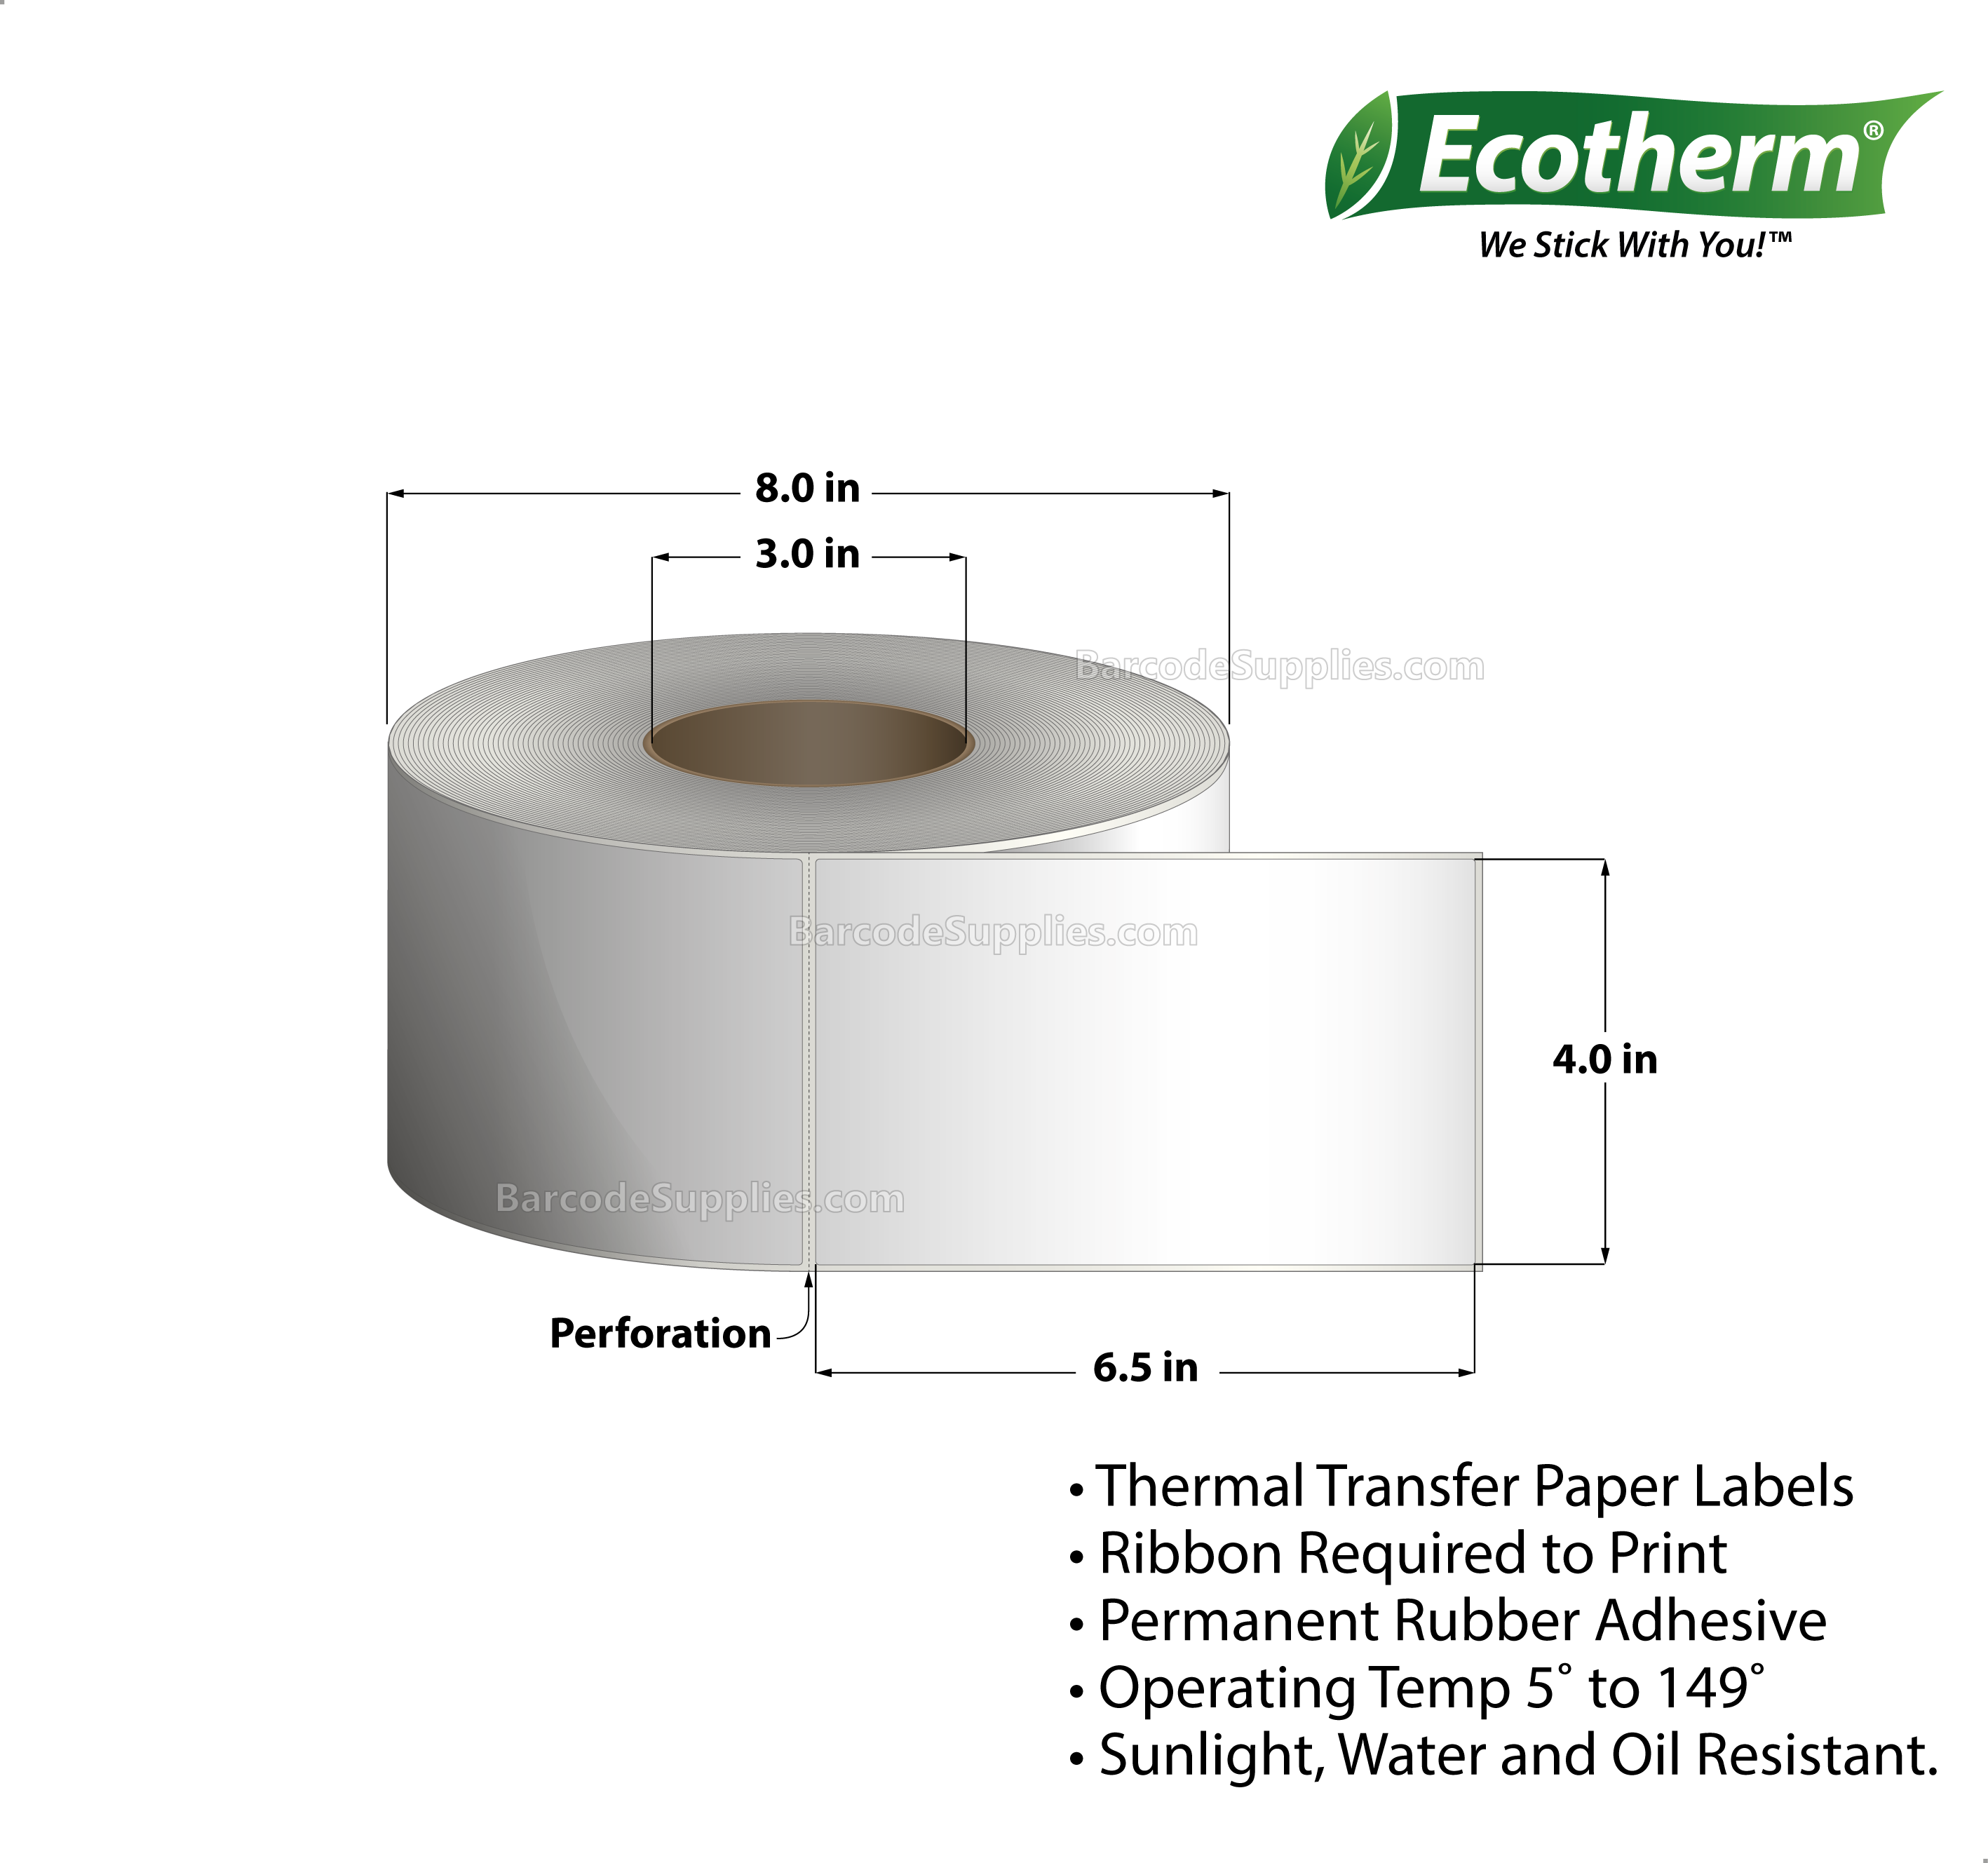 4 x 6.5 Thermal Transfer White Labels With Rubber Adhesive - Perforated - 925 Labels Per Roll - Carton Of 4 Rolls - 3700 Labels Total - MPN: ECOTHERM28146-4